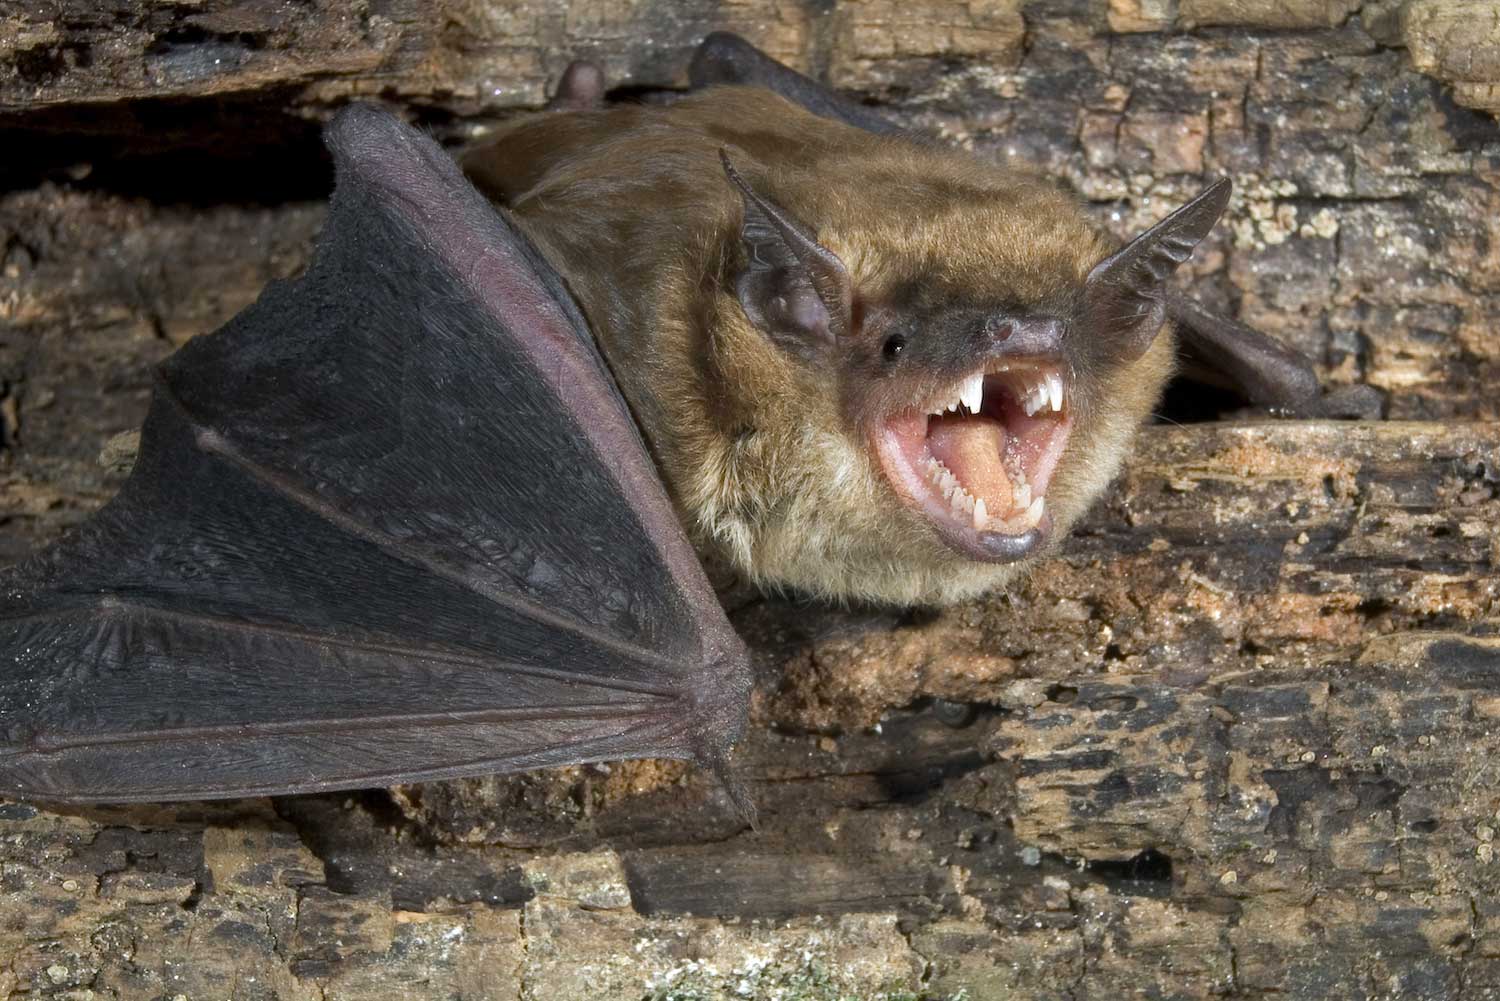 A bat hanging from a tree with its mouth open.